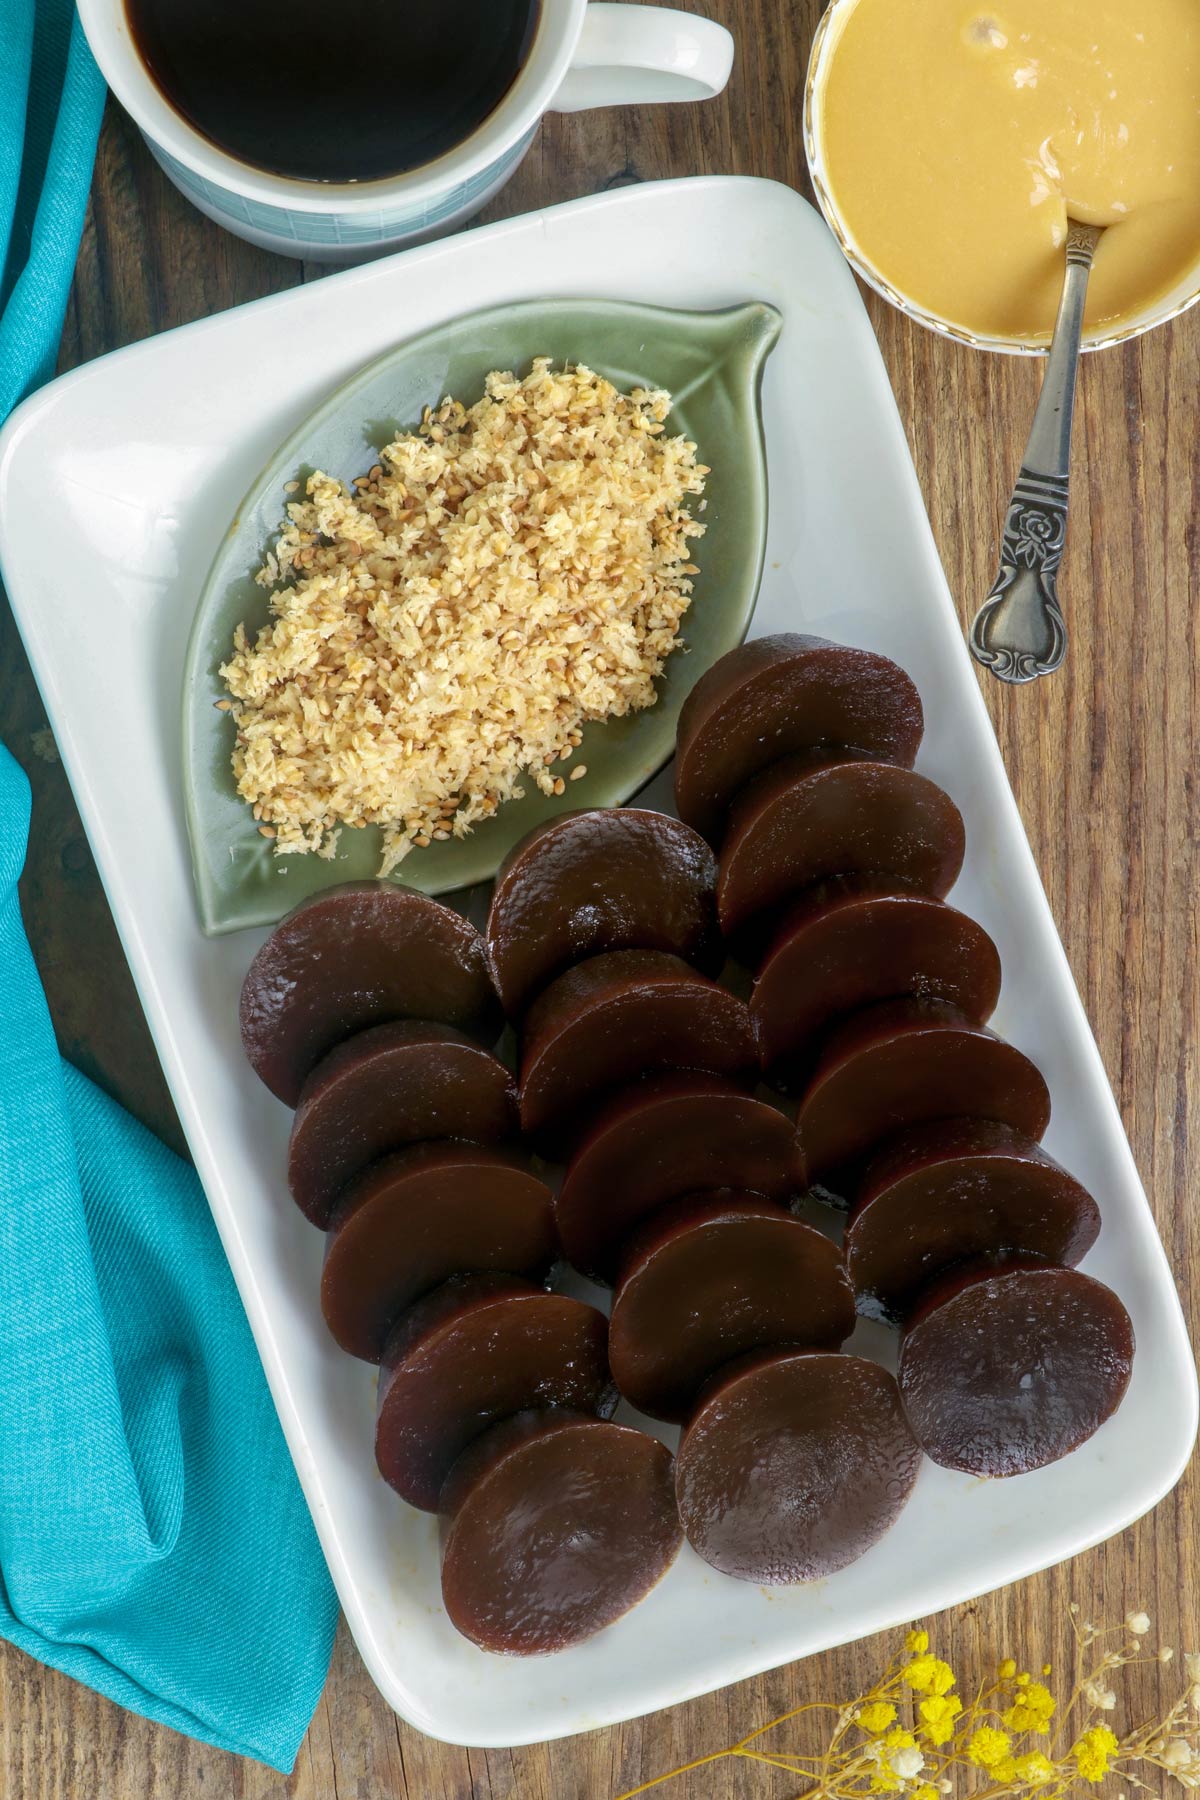 Black Kutsinta served with desiccated coconut and dulce de leche. 